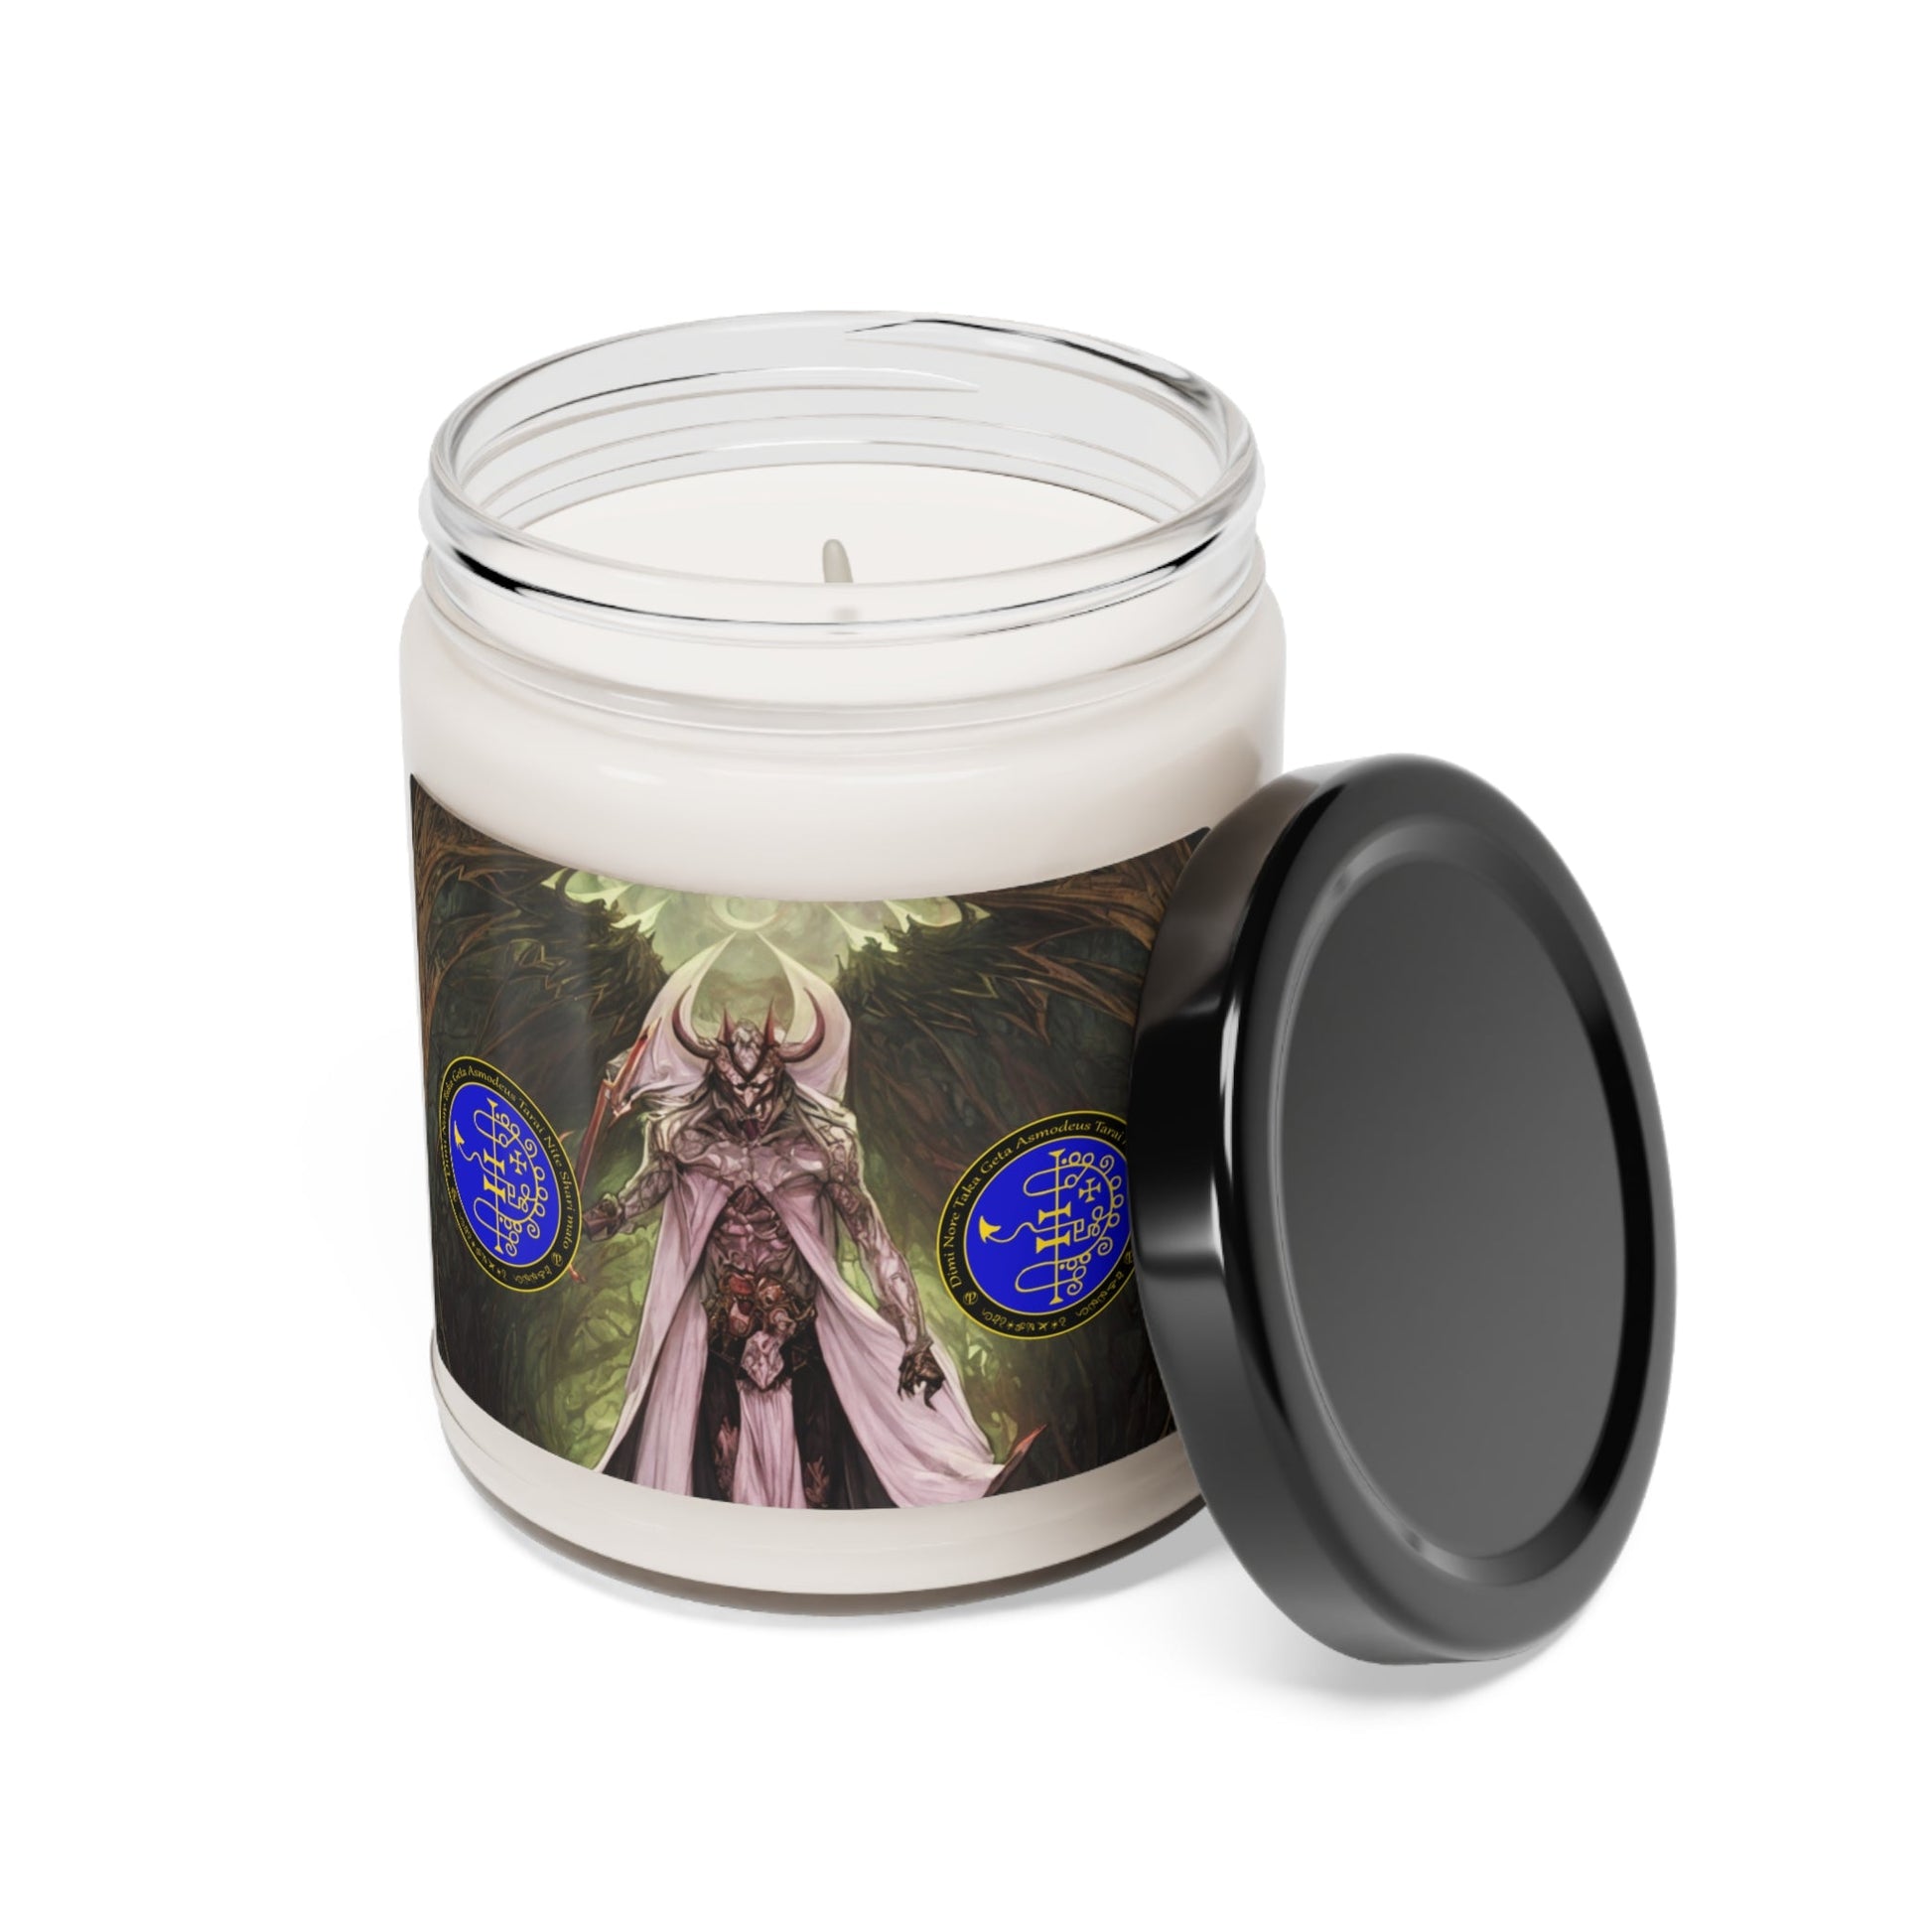 Demon-Asmodeus-Altar-Scented-Soy-Candle-for-Gambling-related-offerings-rituals-initiations-or-praying-and-meditation-2